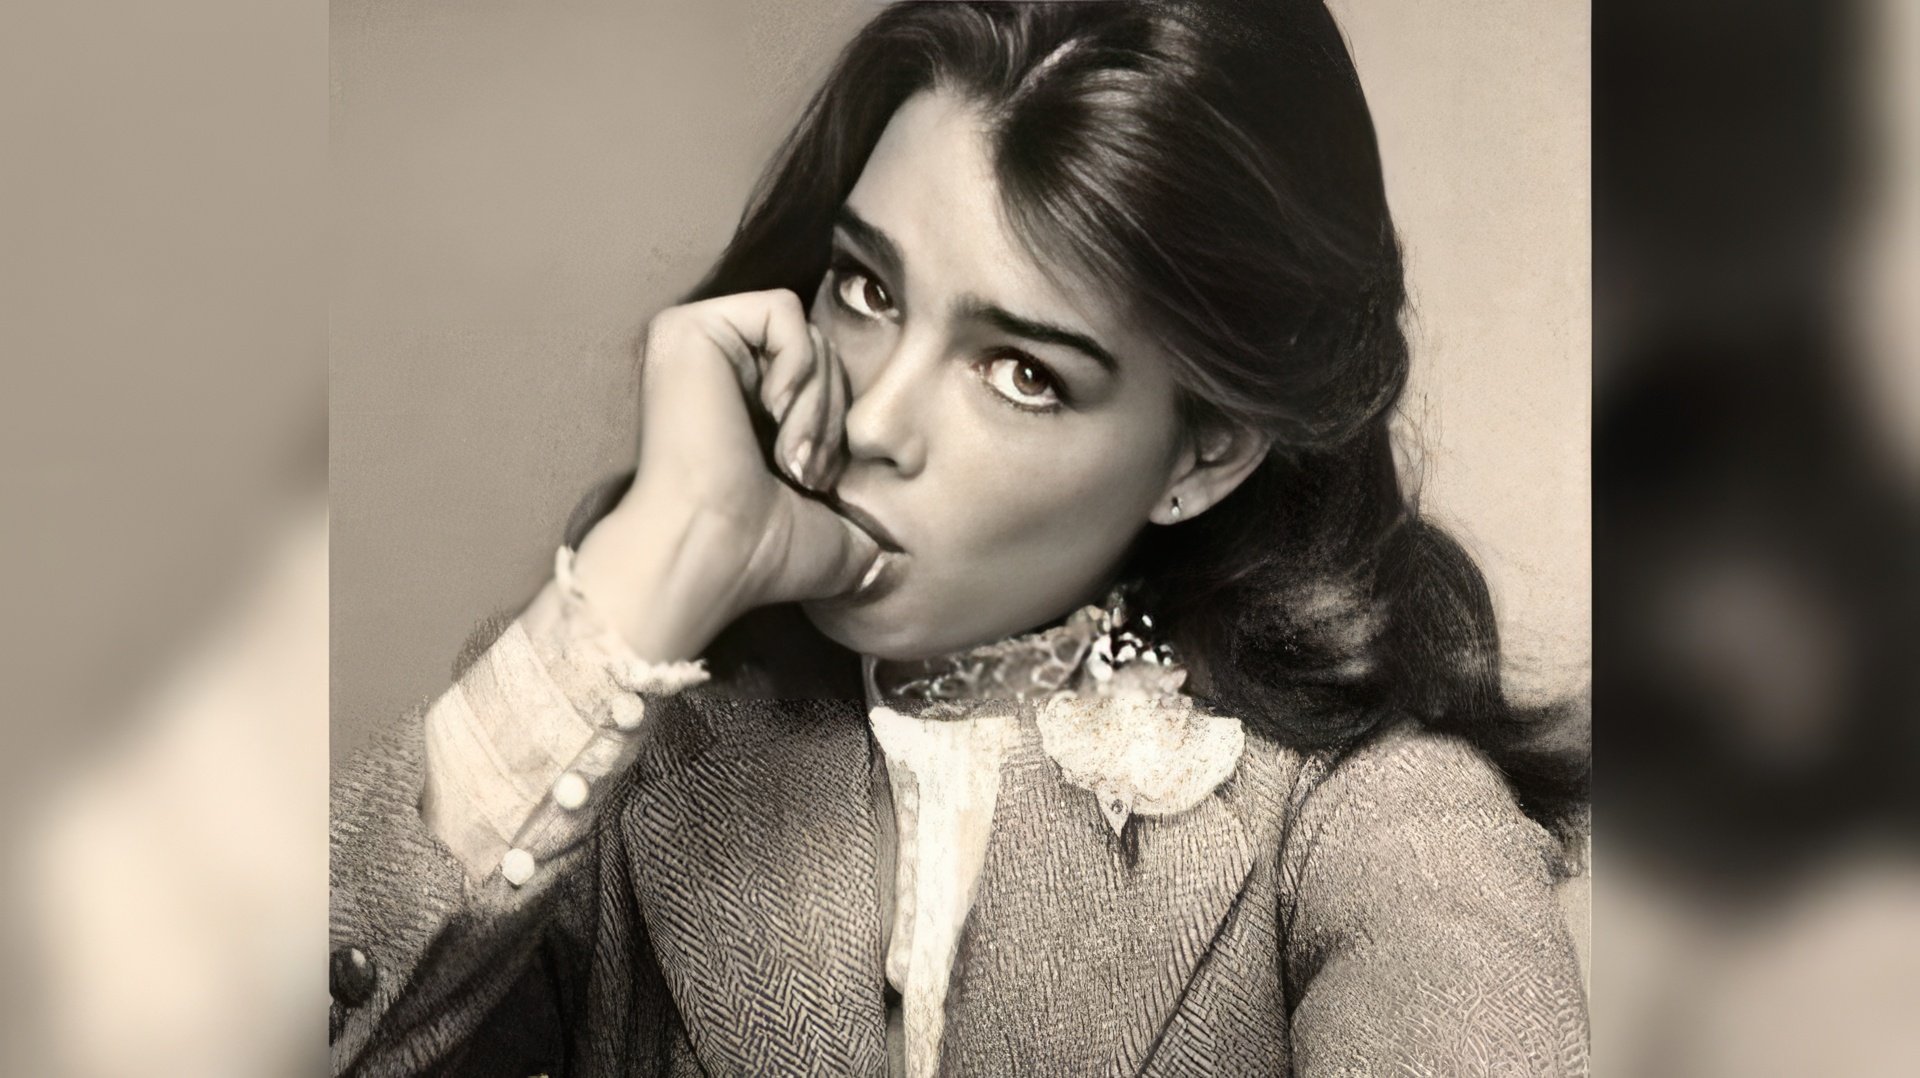 Brooke Shields at the beginning of her career